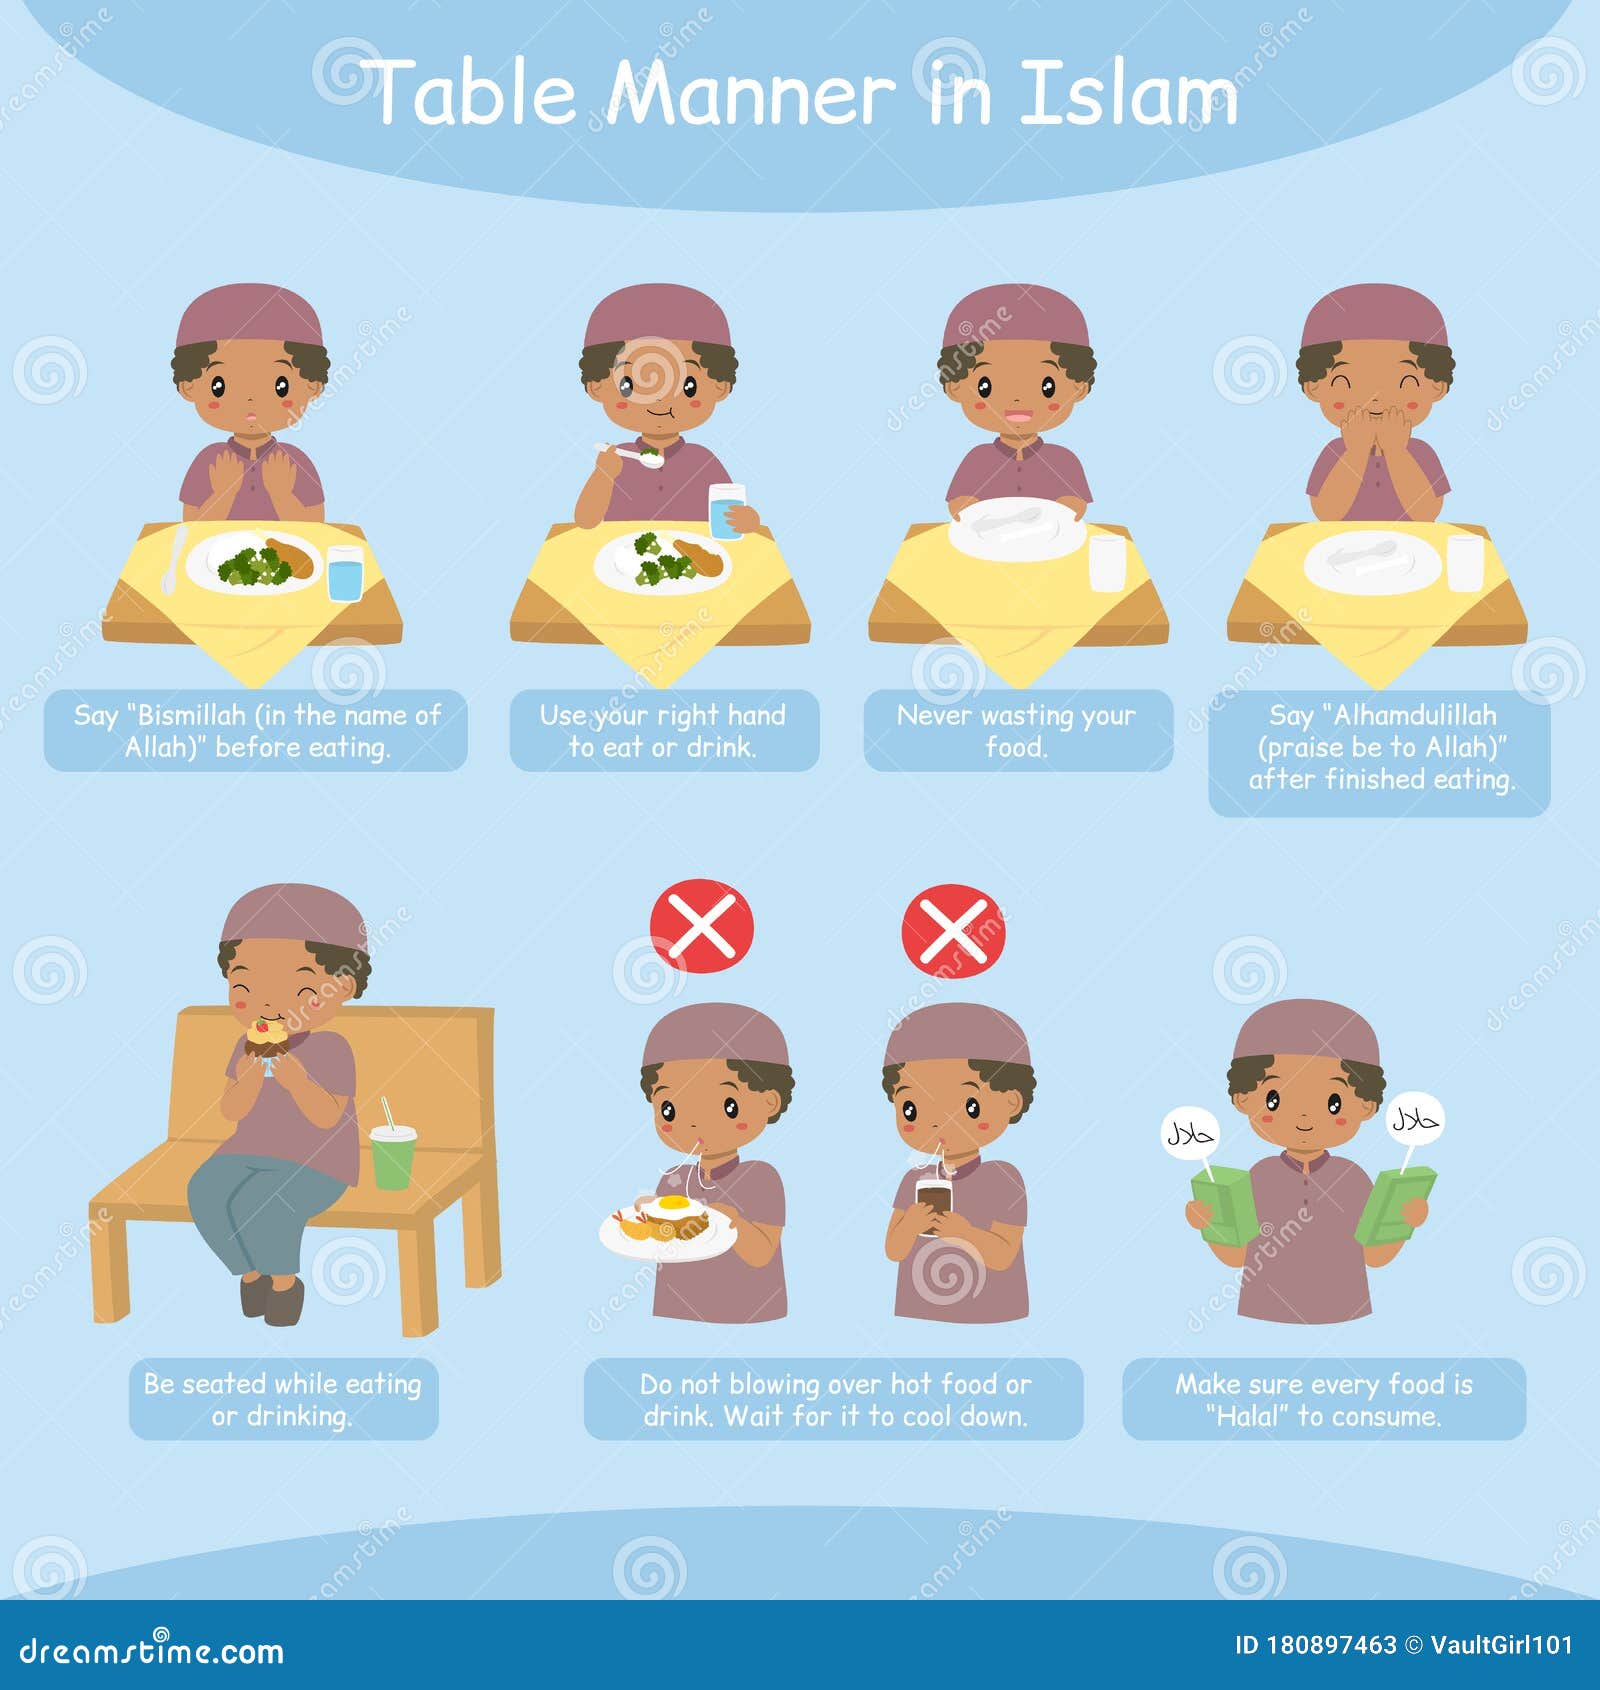 How can you play table manners?